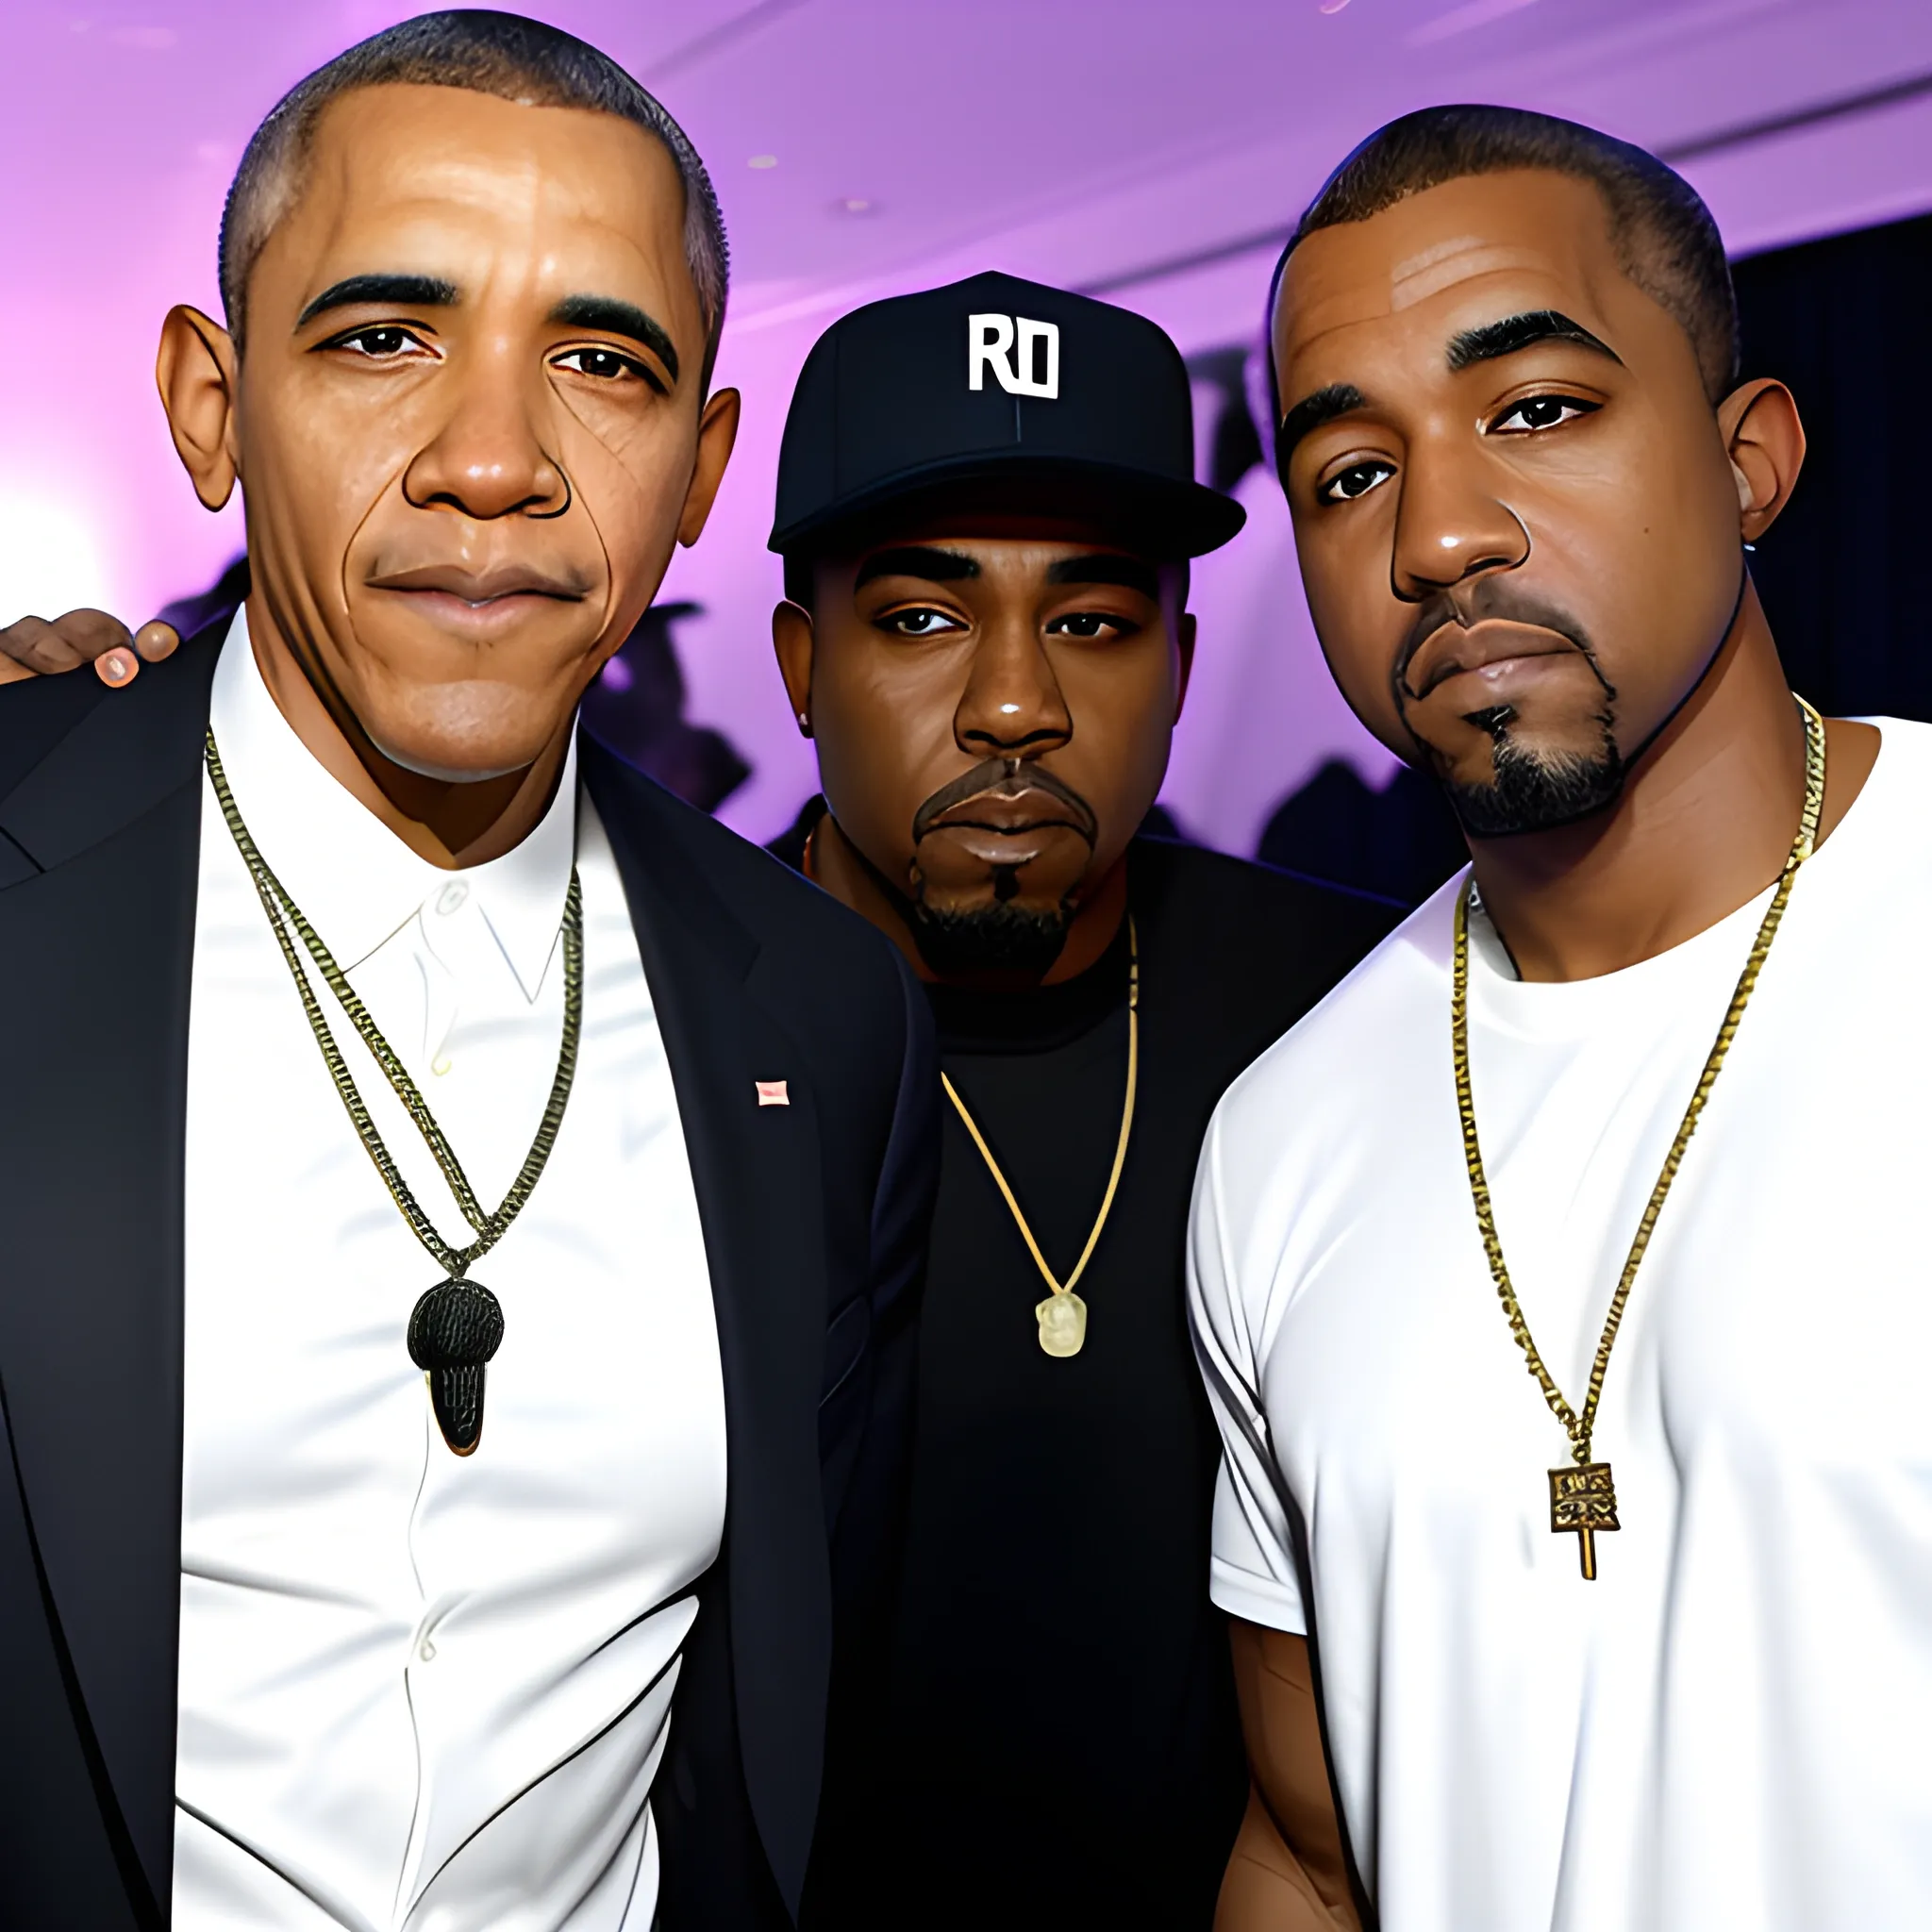 obama hanging out with lil uzi vert and kanye west, 3D